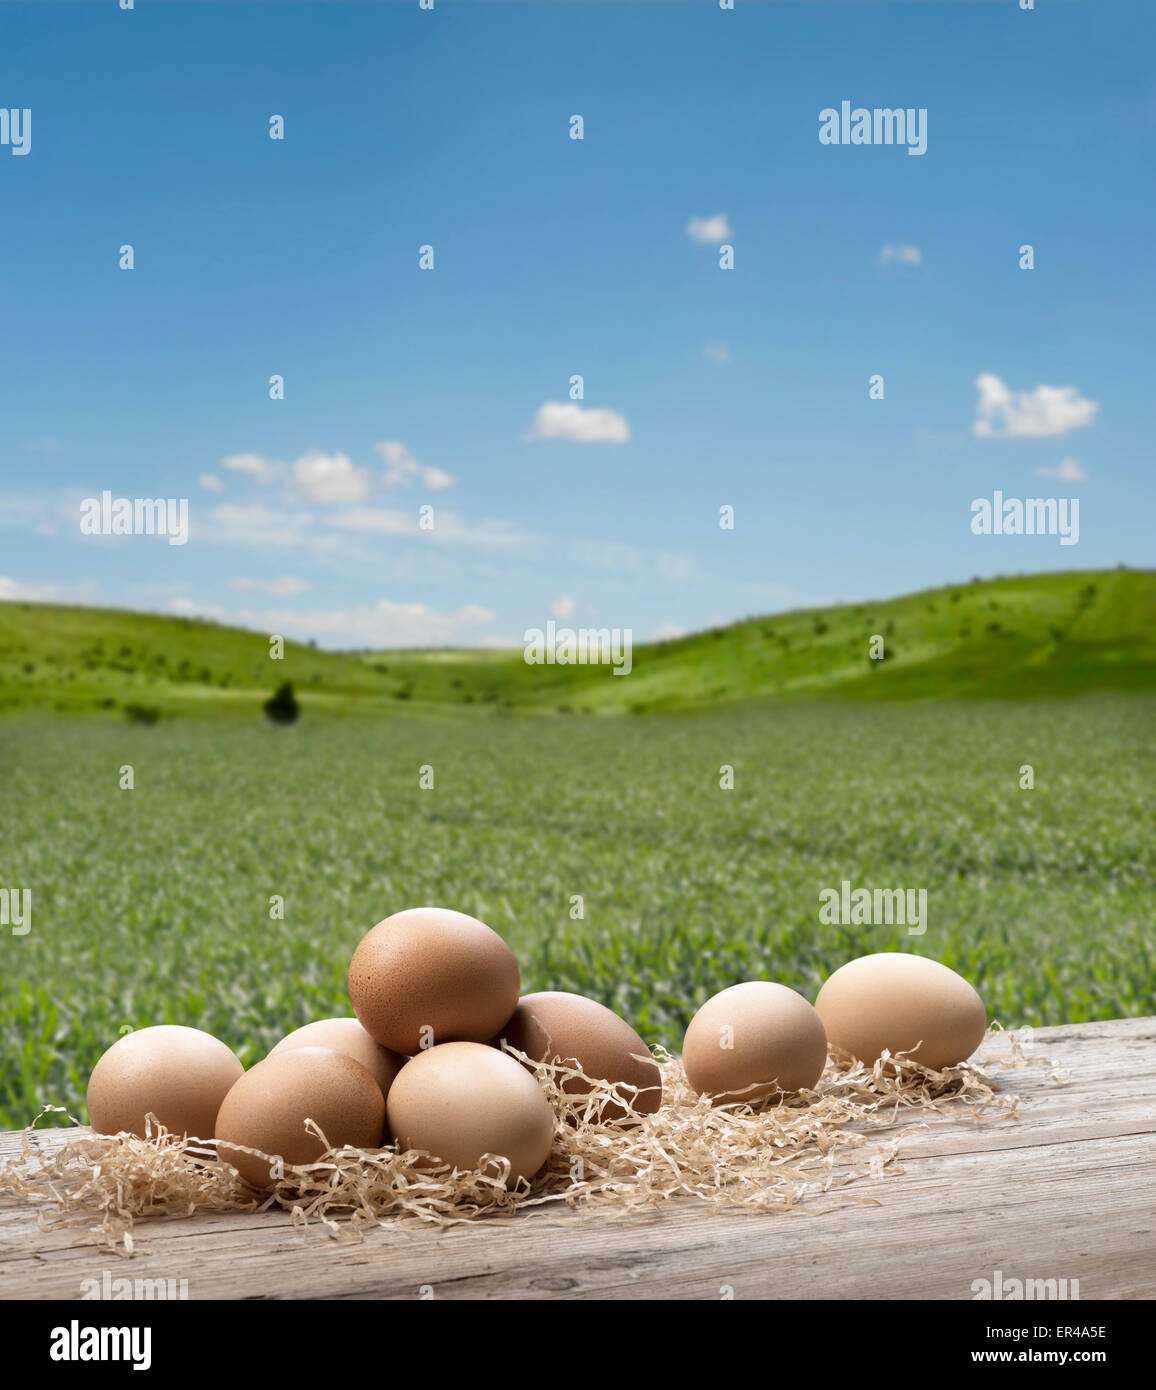 group of eggs on wooden table with summer landscape Stock Photo